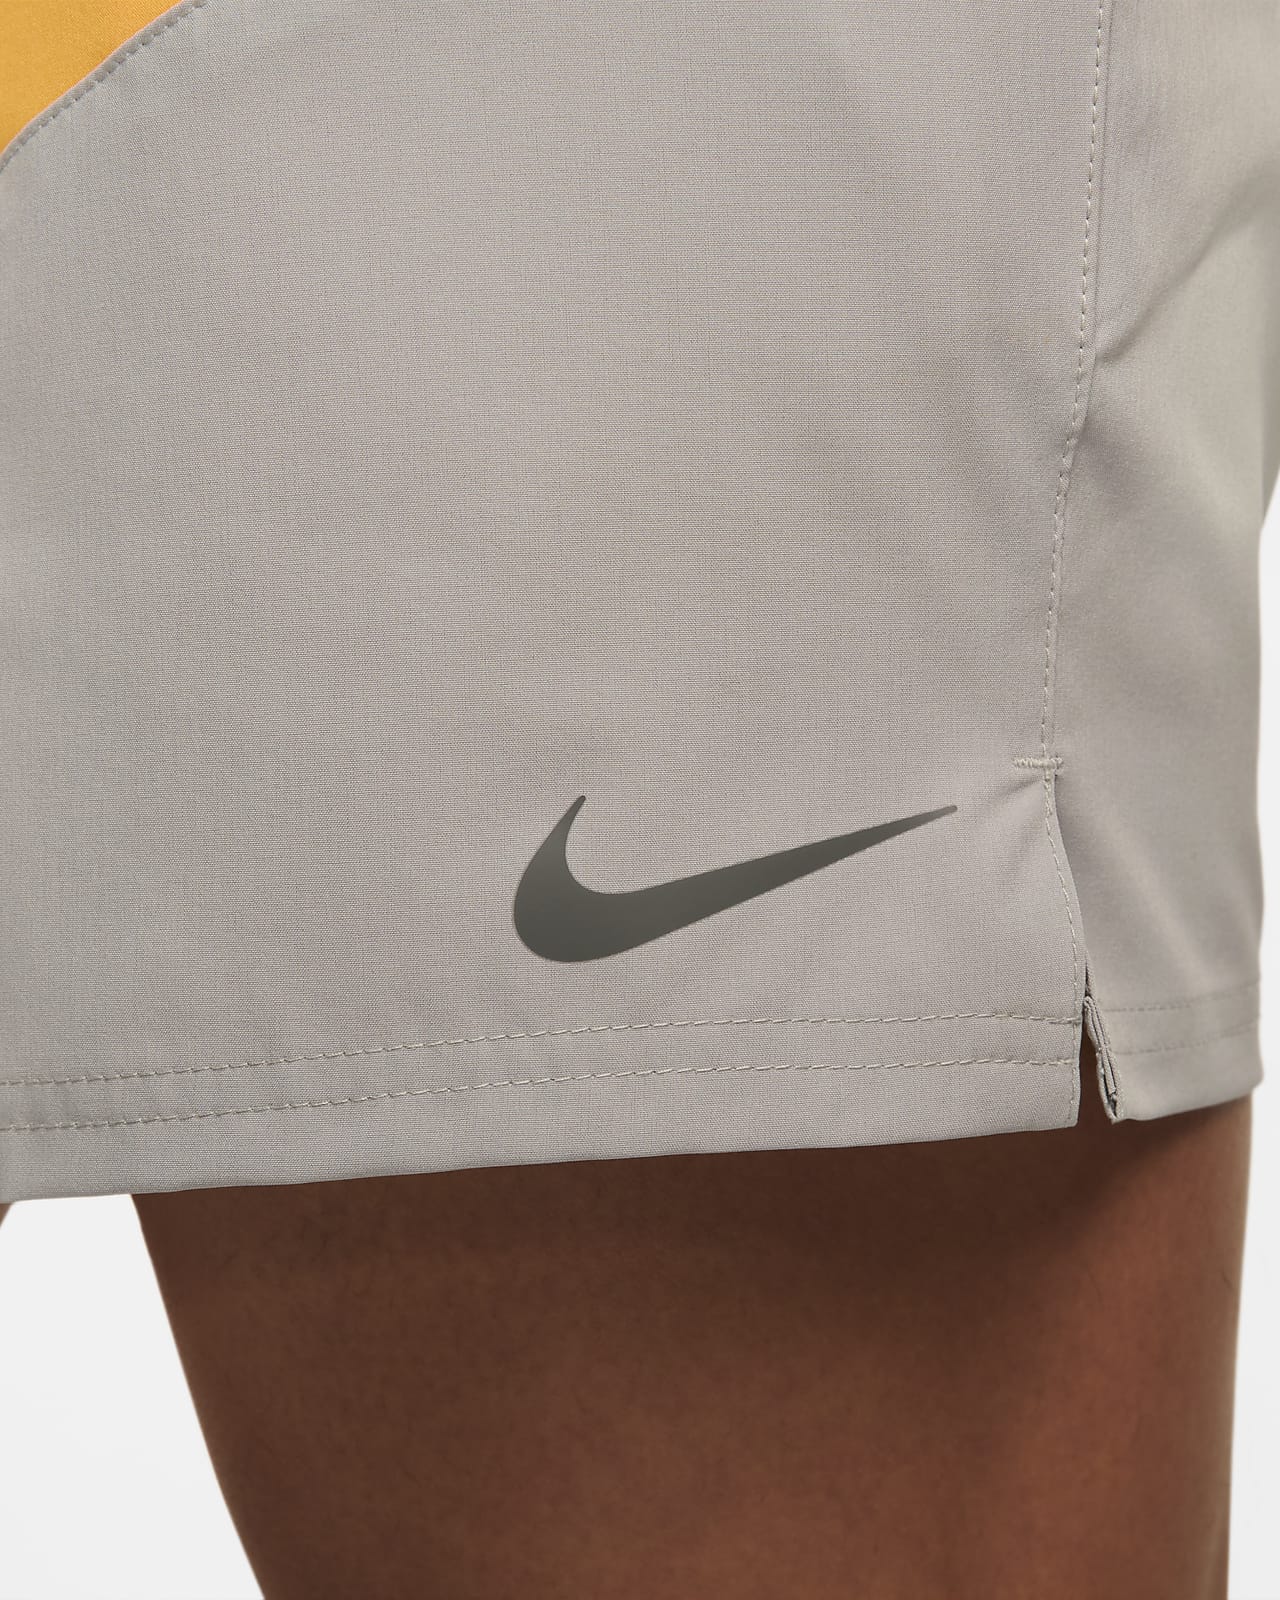 Men's 13cm (approx.) Volley Swimming Shorts. Nike LU